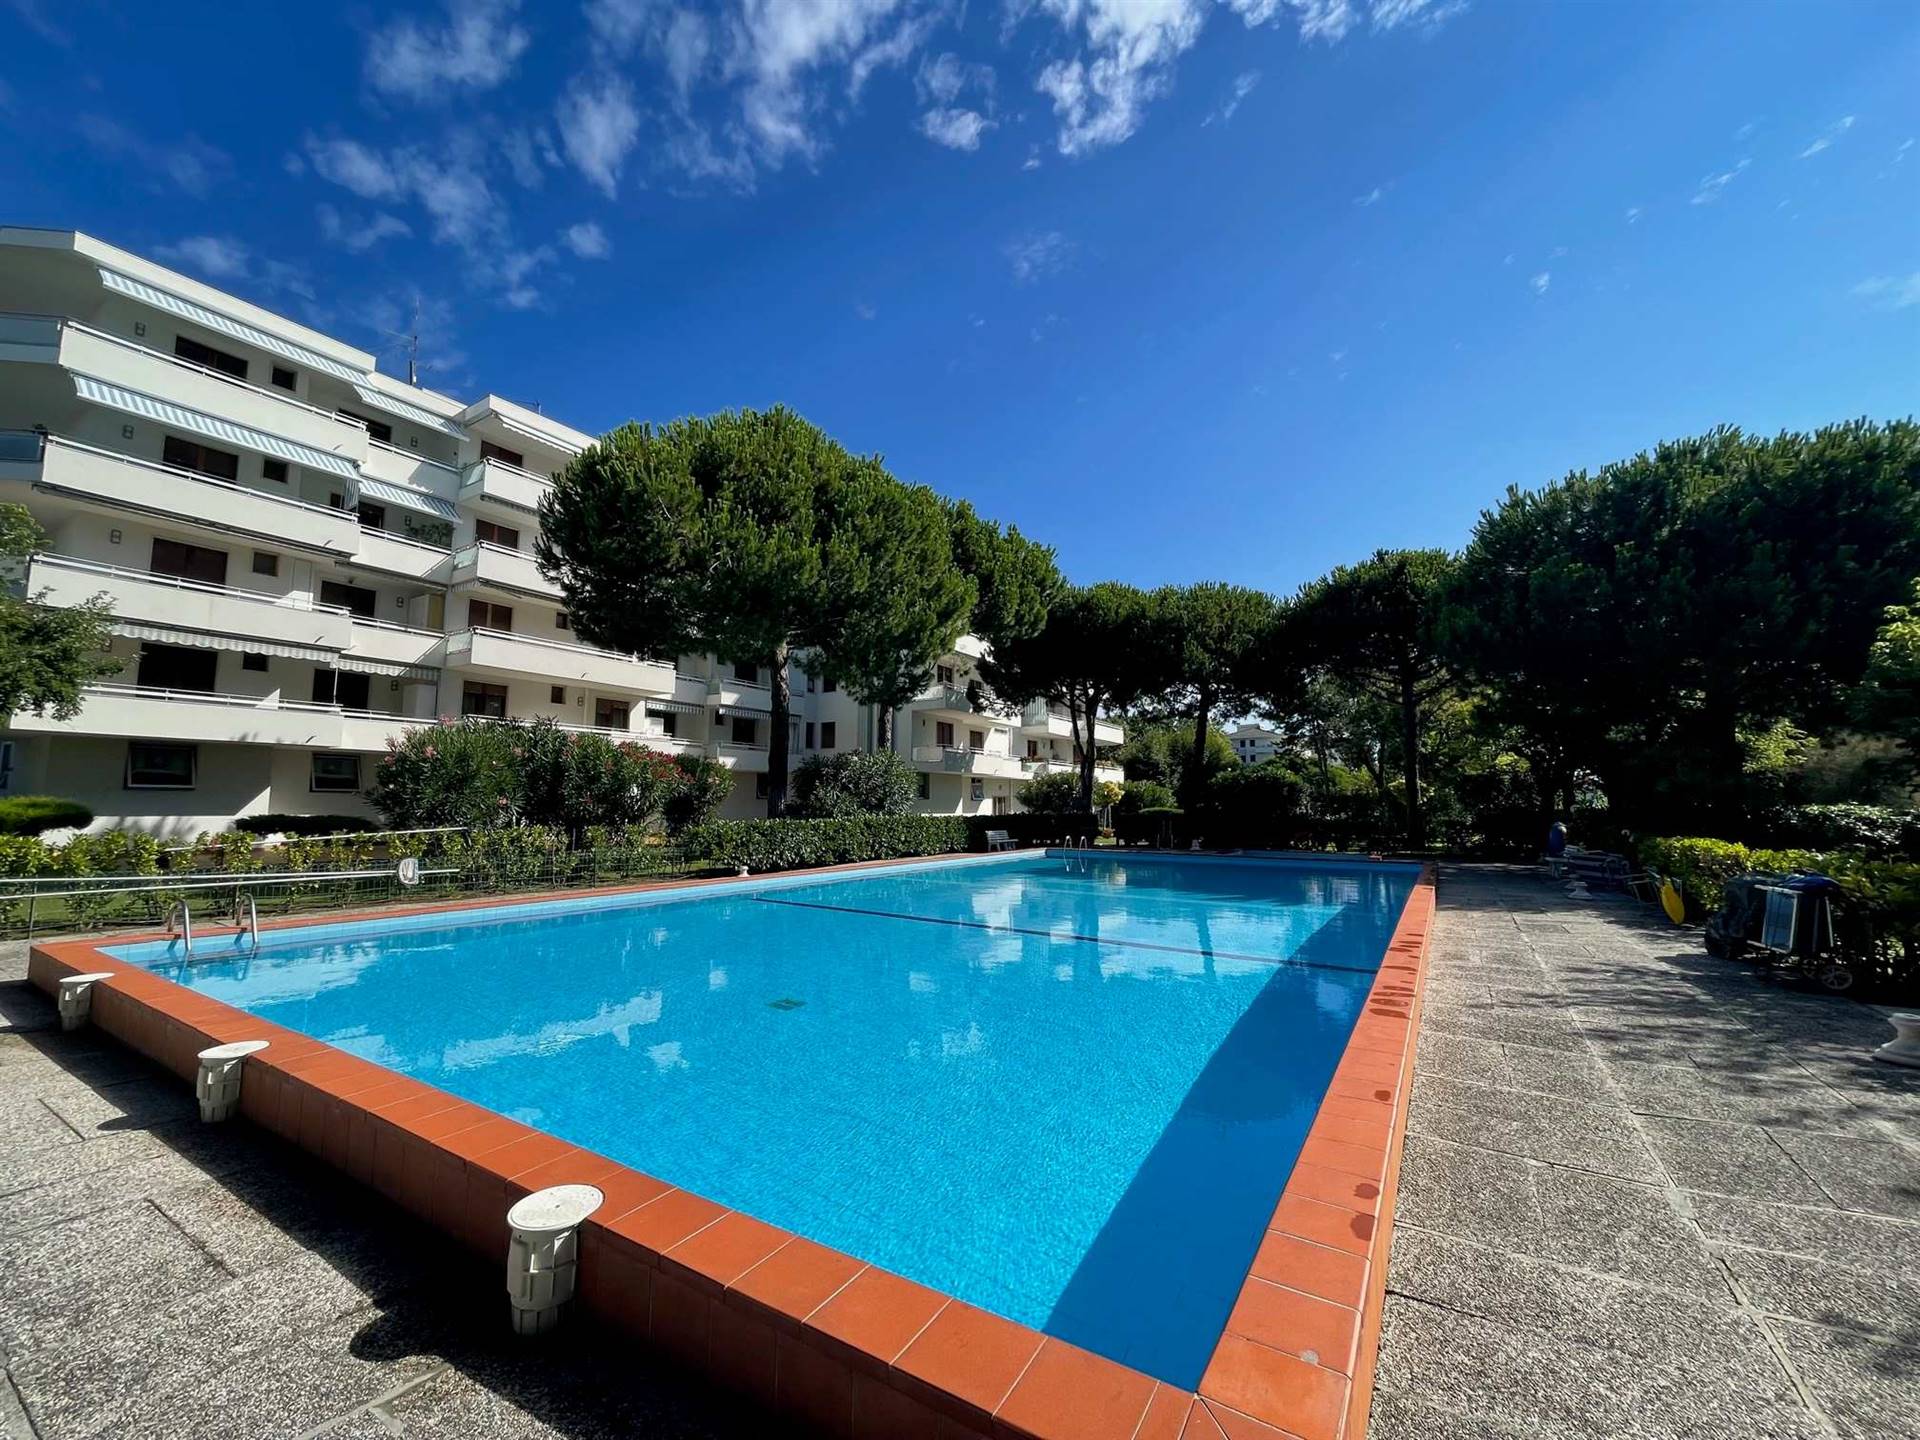 Three-room apartment on the first floor a few steps from the sea, Cavallino